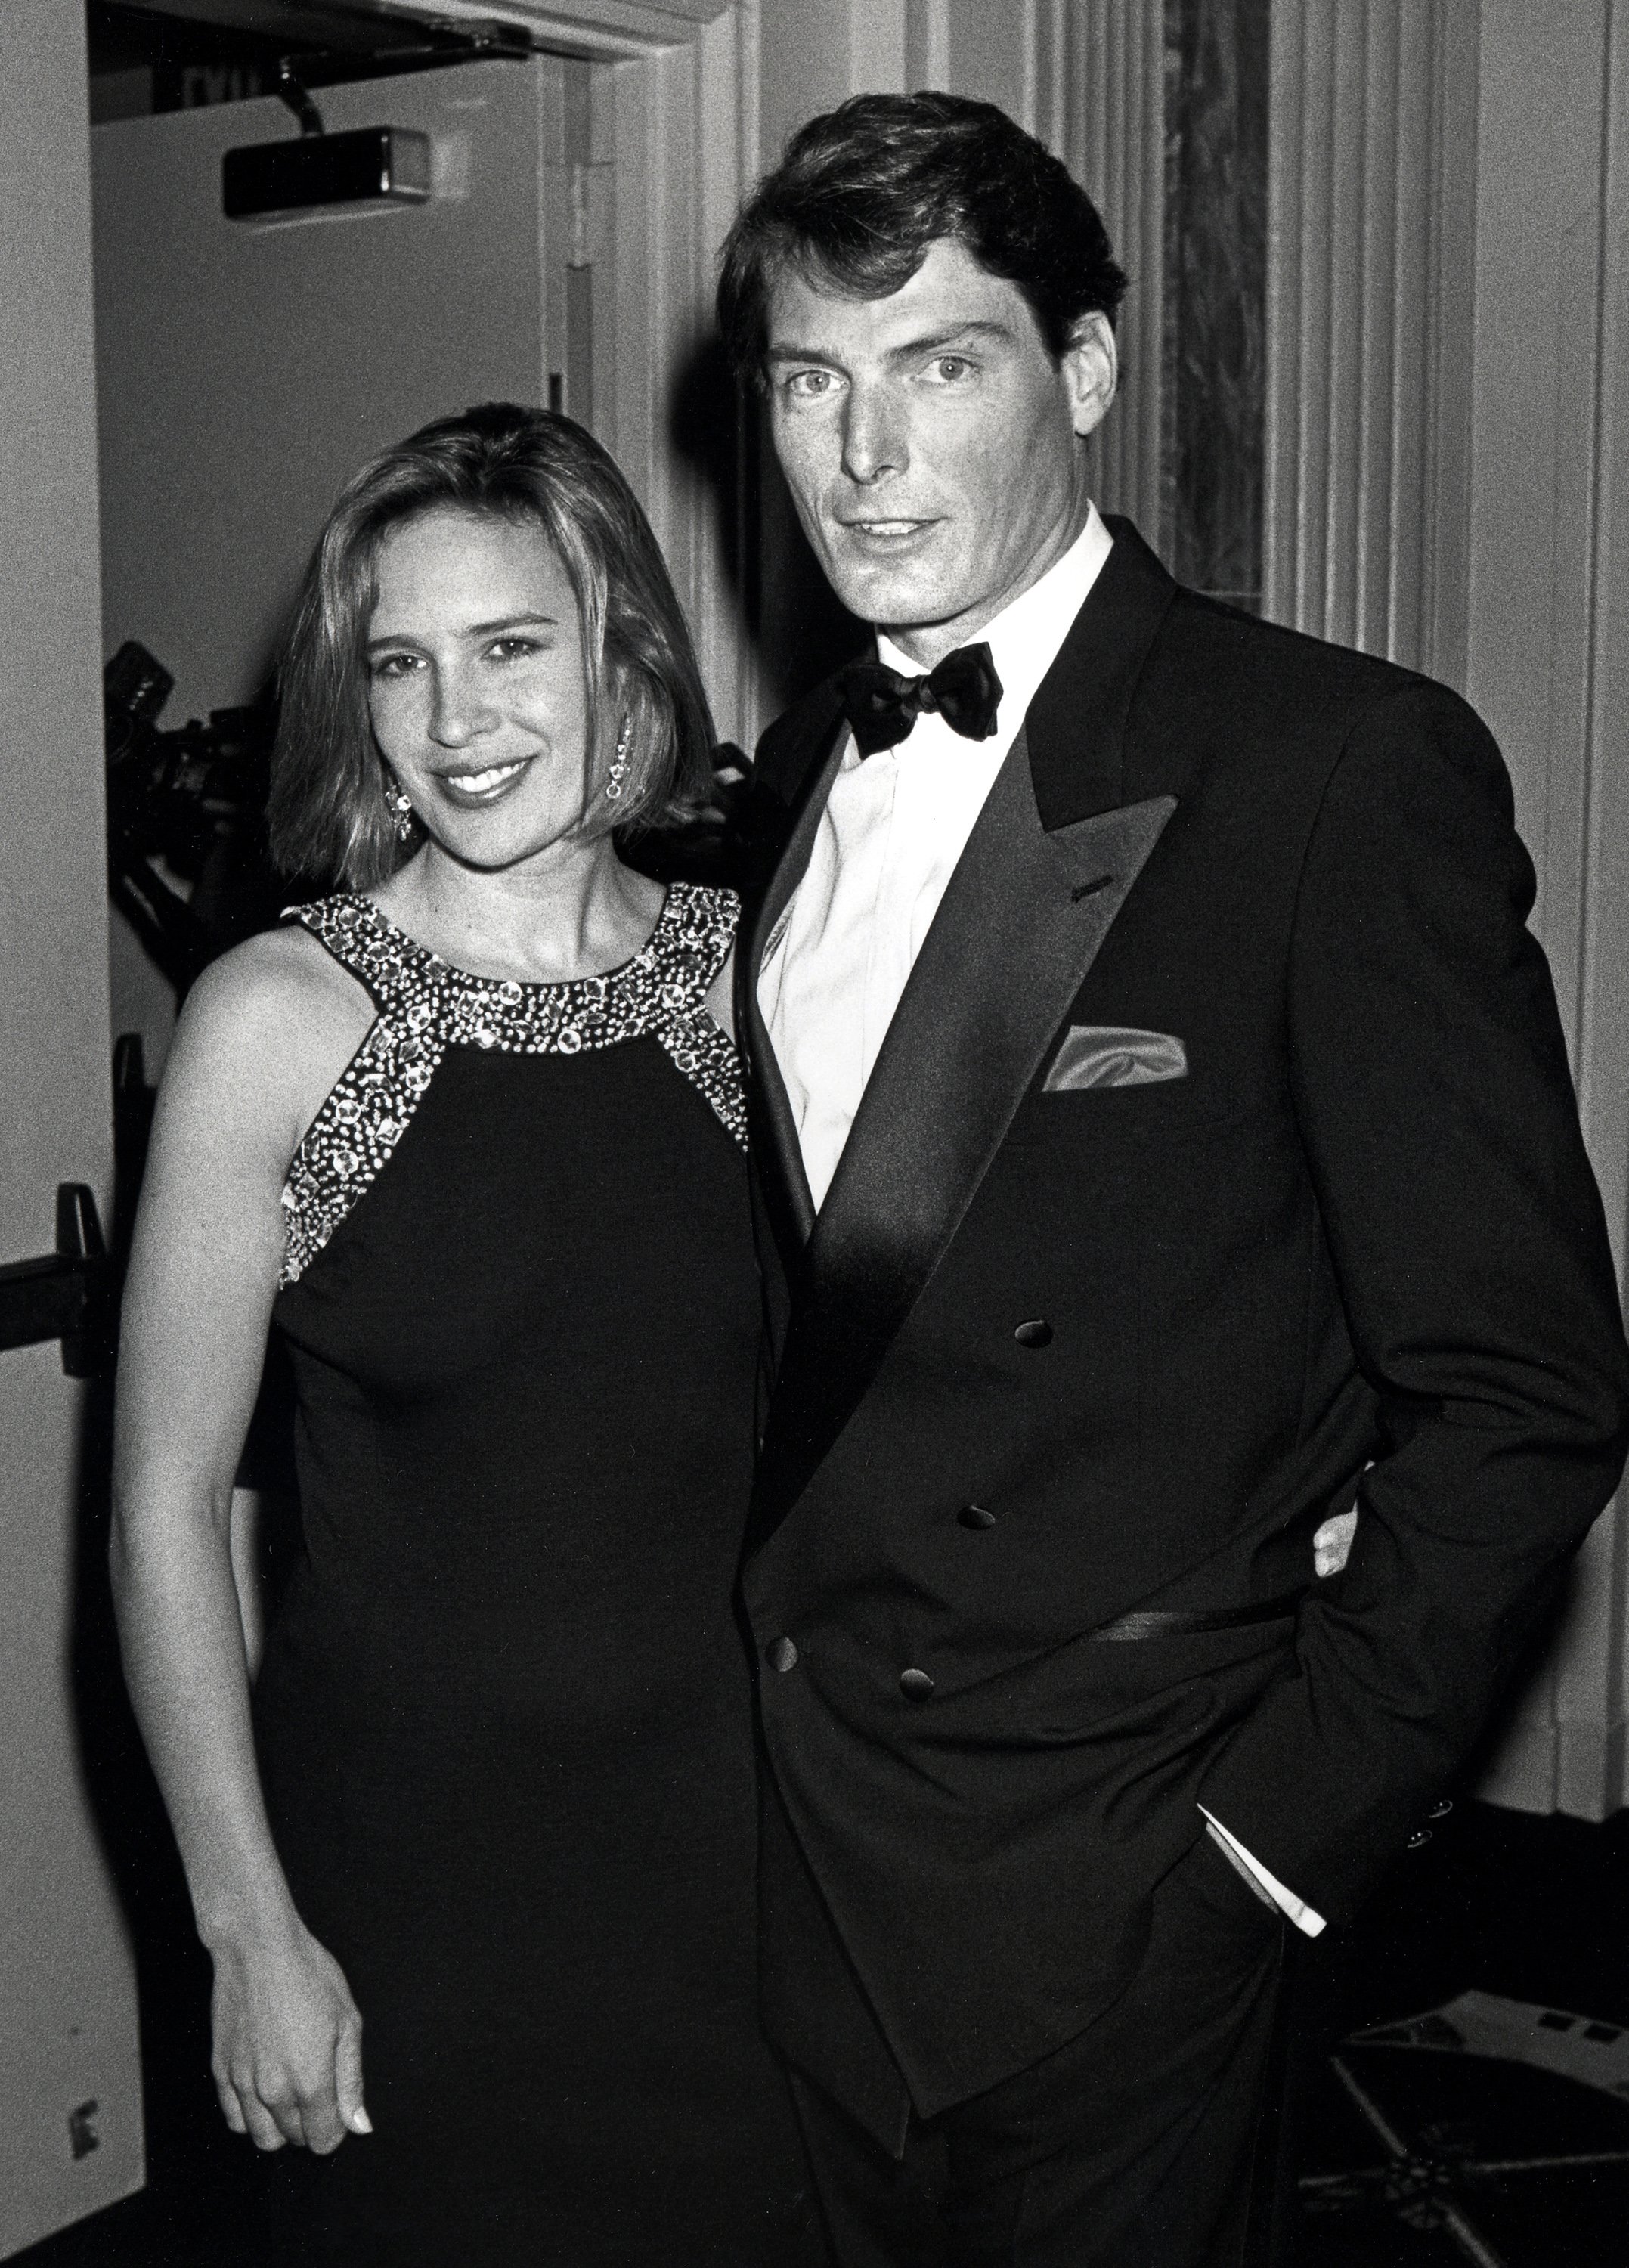 Actress Dana Reeve and her husband Christopher Reeve during "The Spirit of Liberty" Awards Dinner & the 10th Anniversary Celebration of People for the American Way at Waldorf Hotel in New York City, New York. / Source: Getty Images